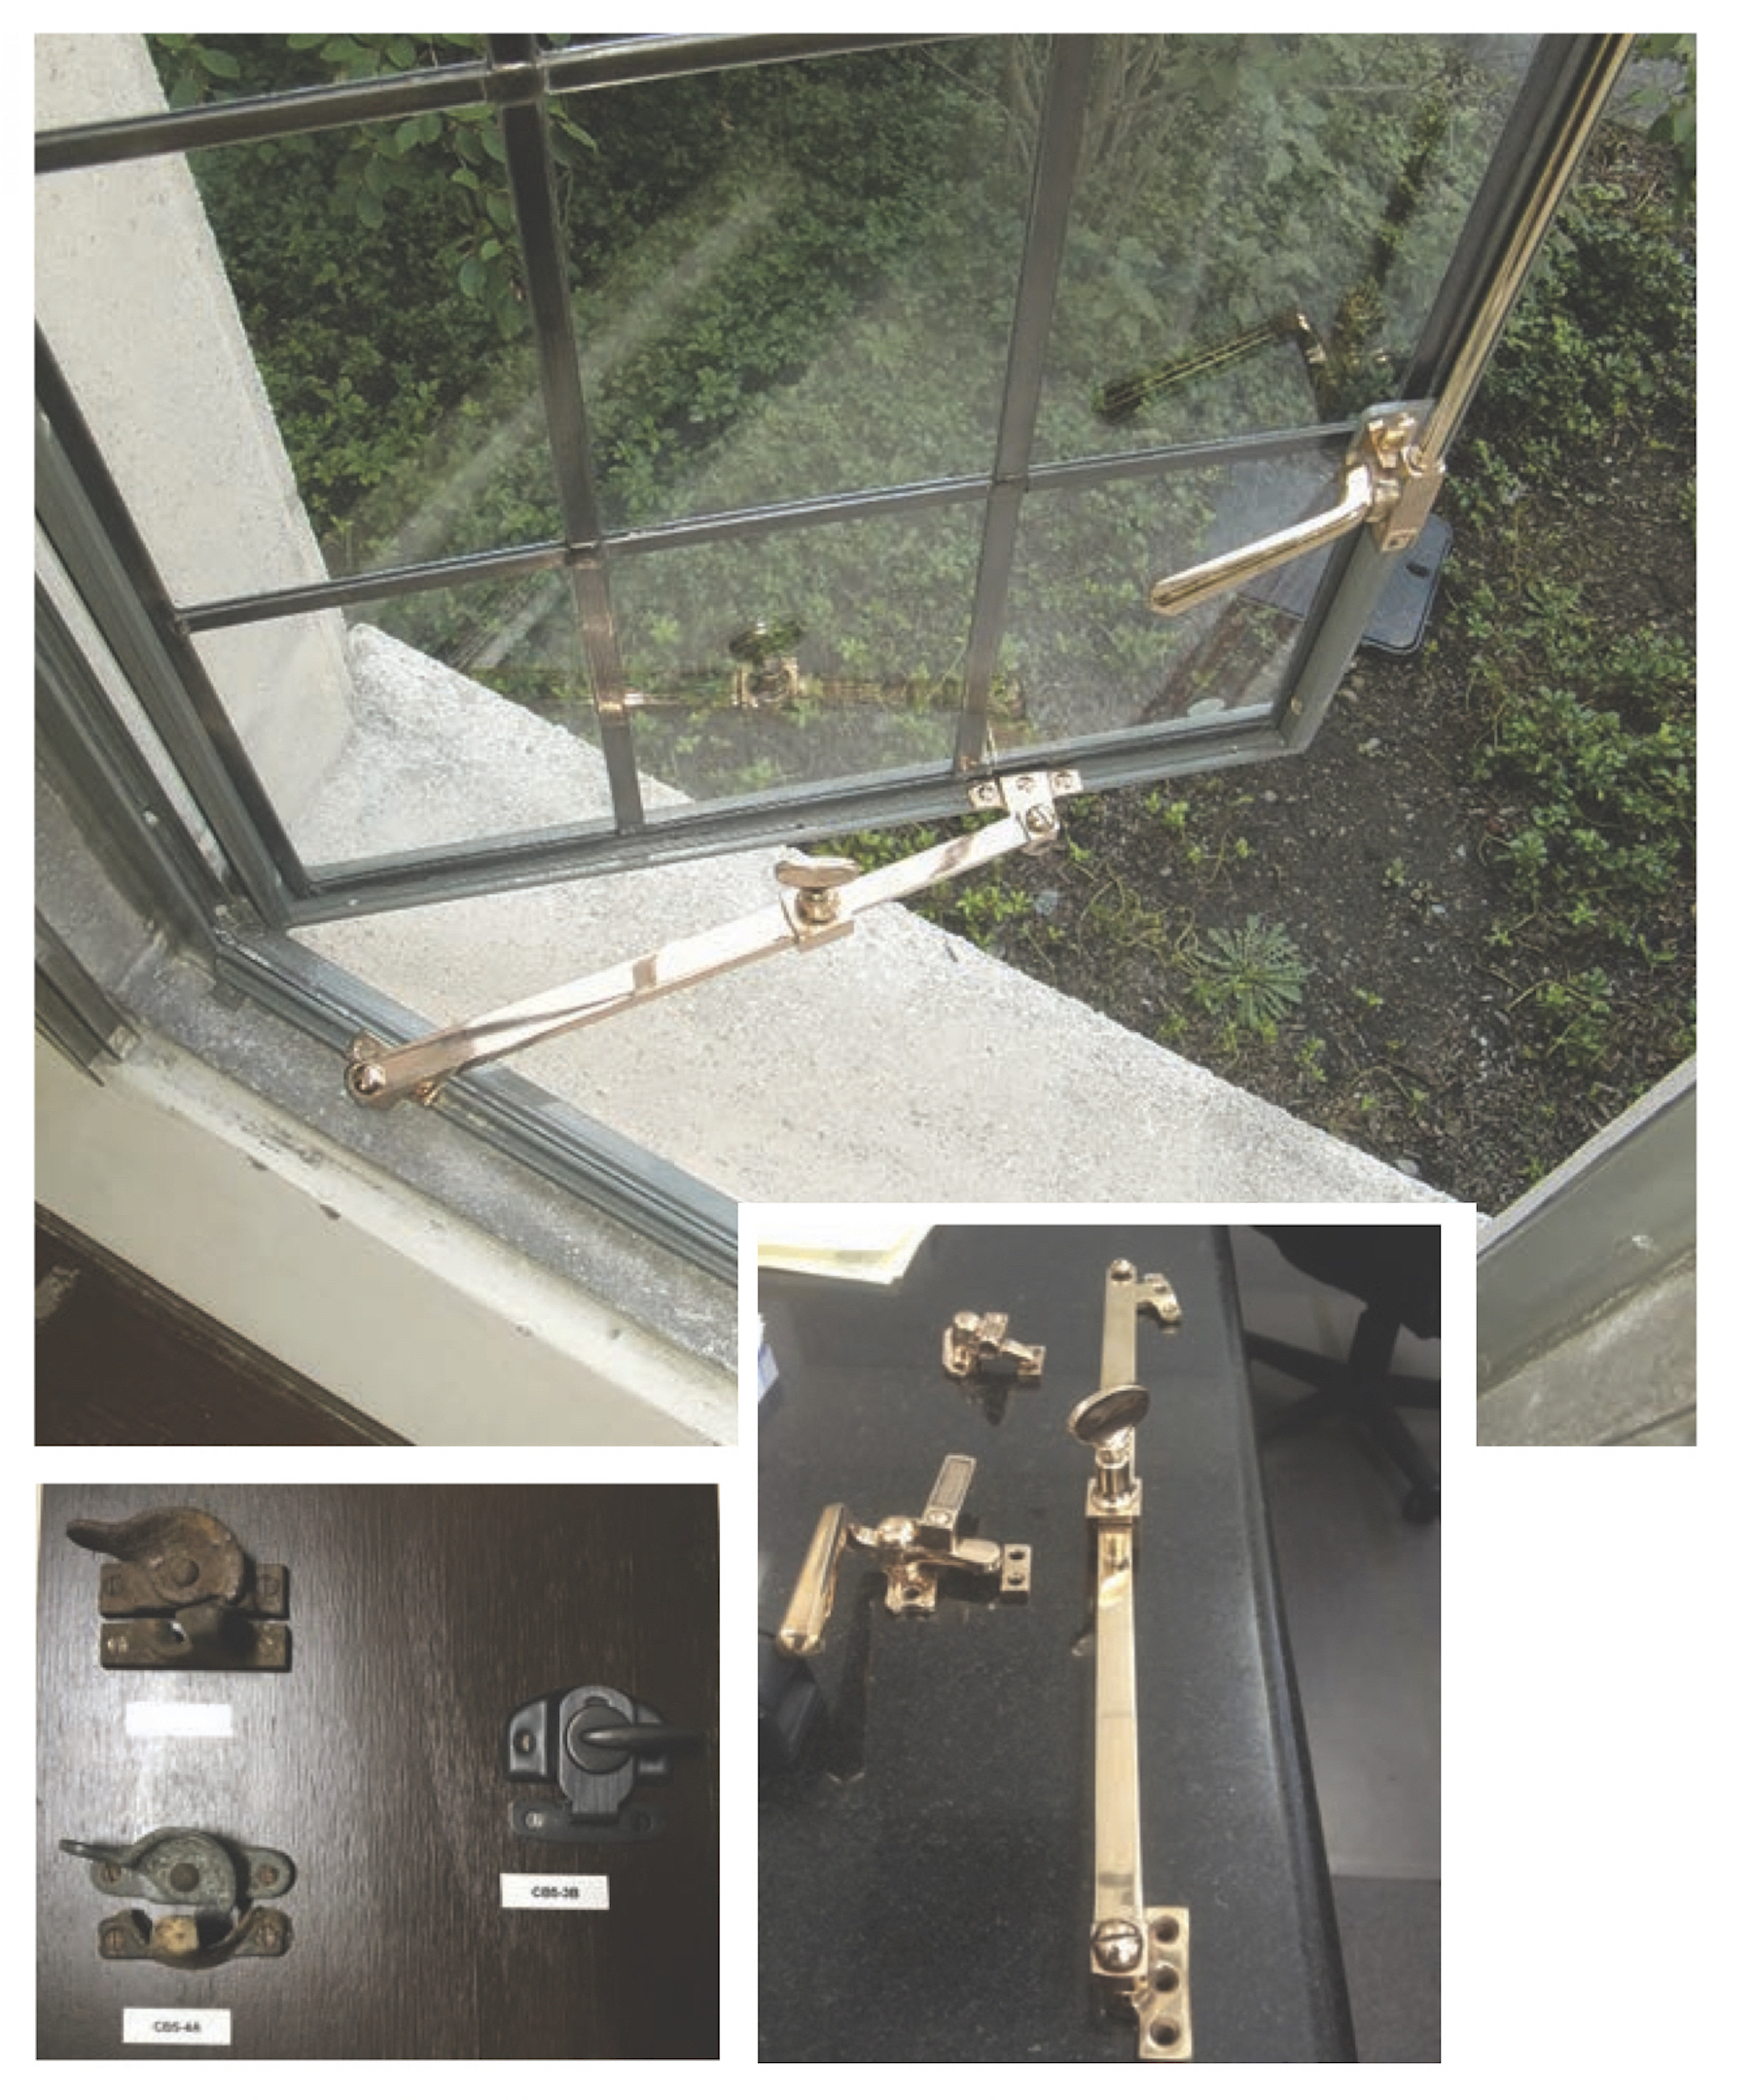 Performance considerations for historic window replacement and repair hardware